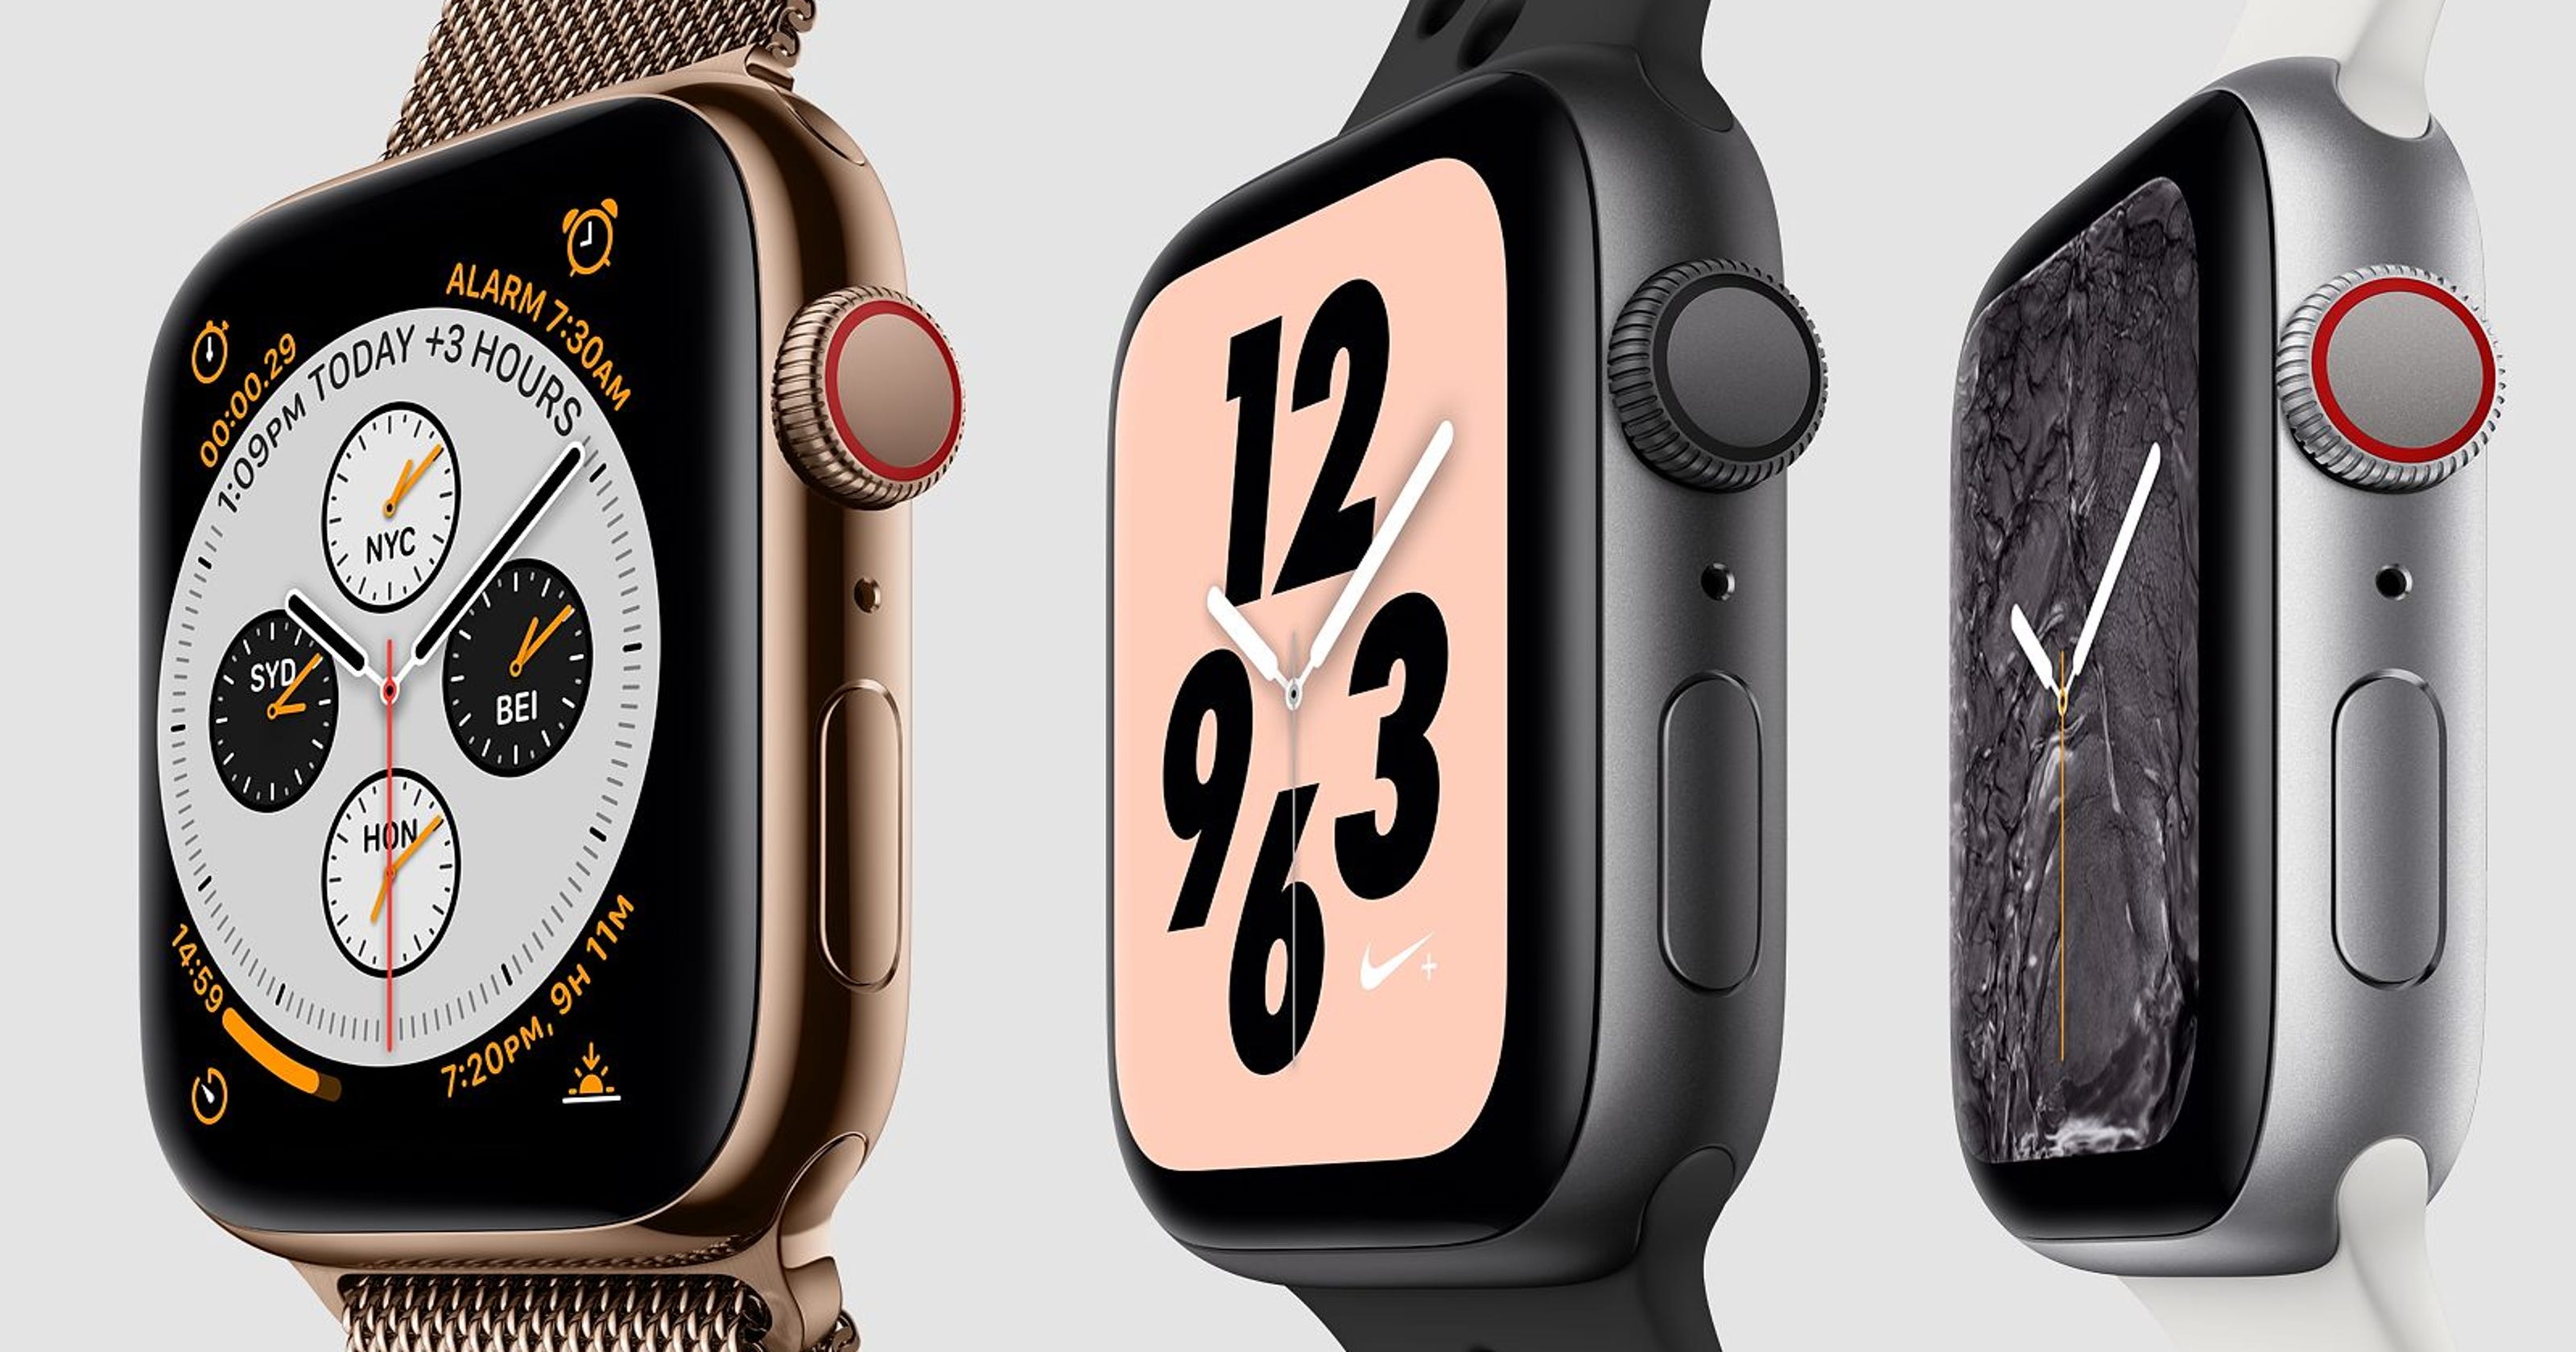 The best Apple Watch deals of Black Friday 2018: